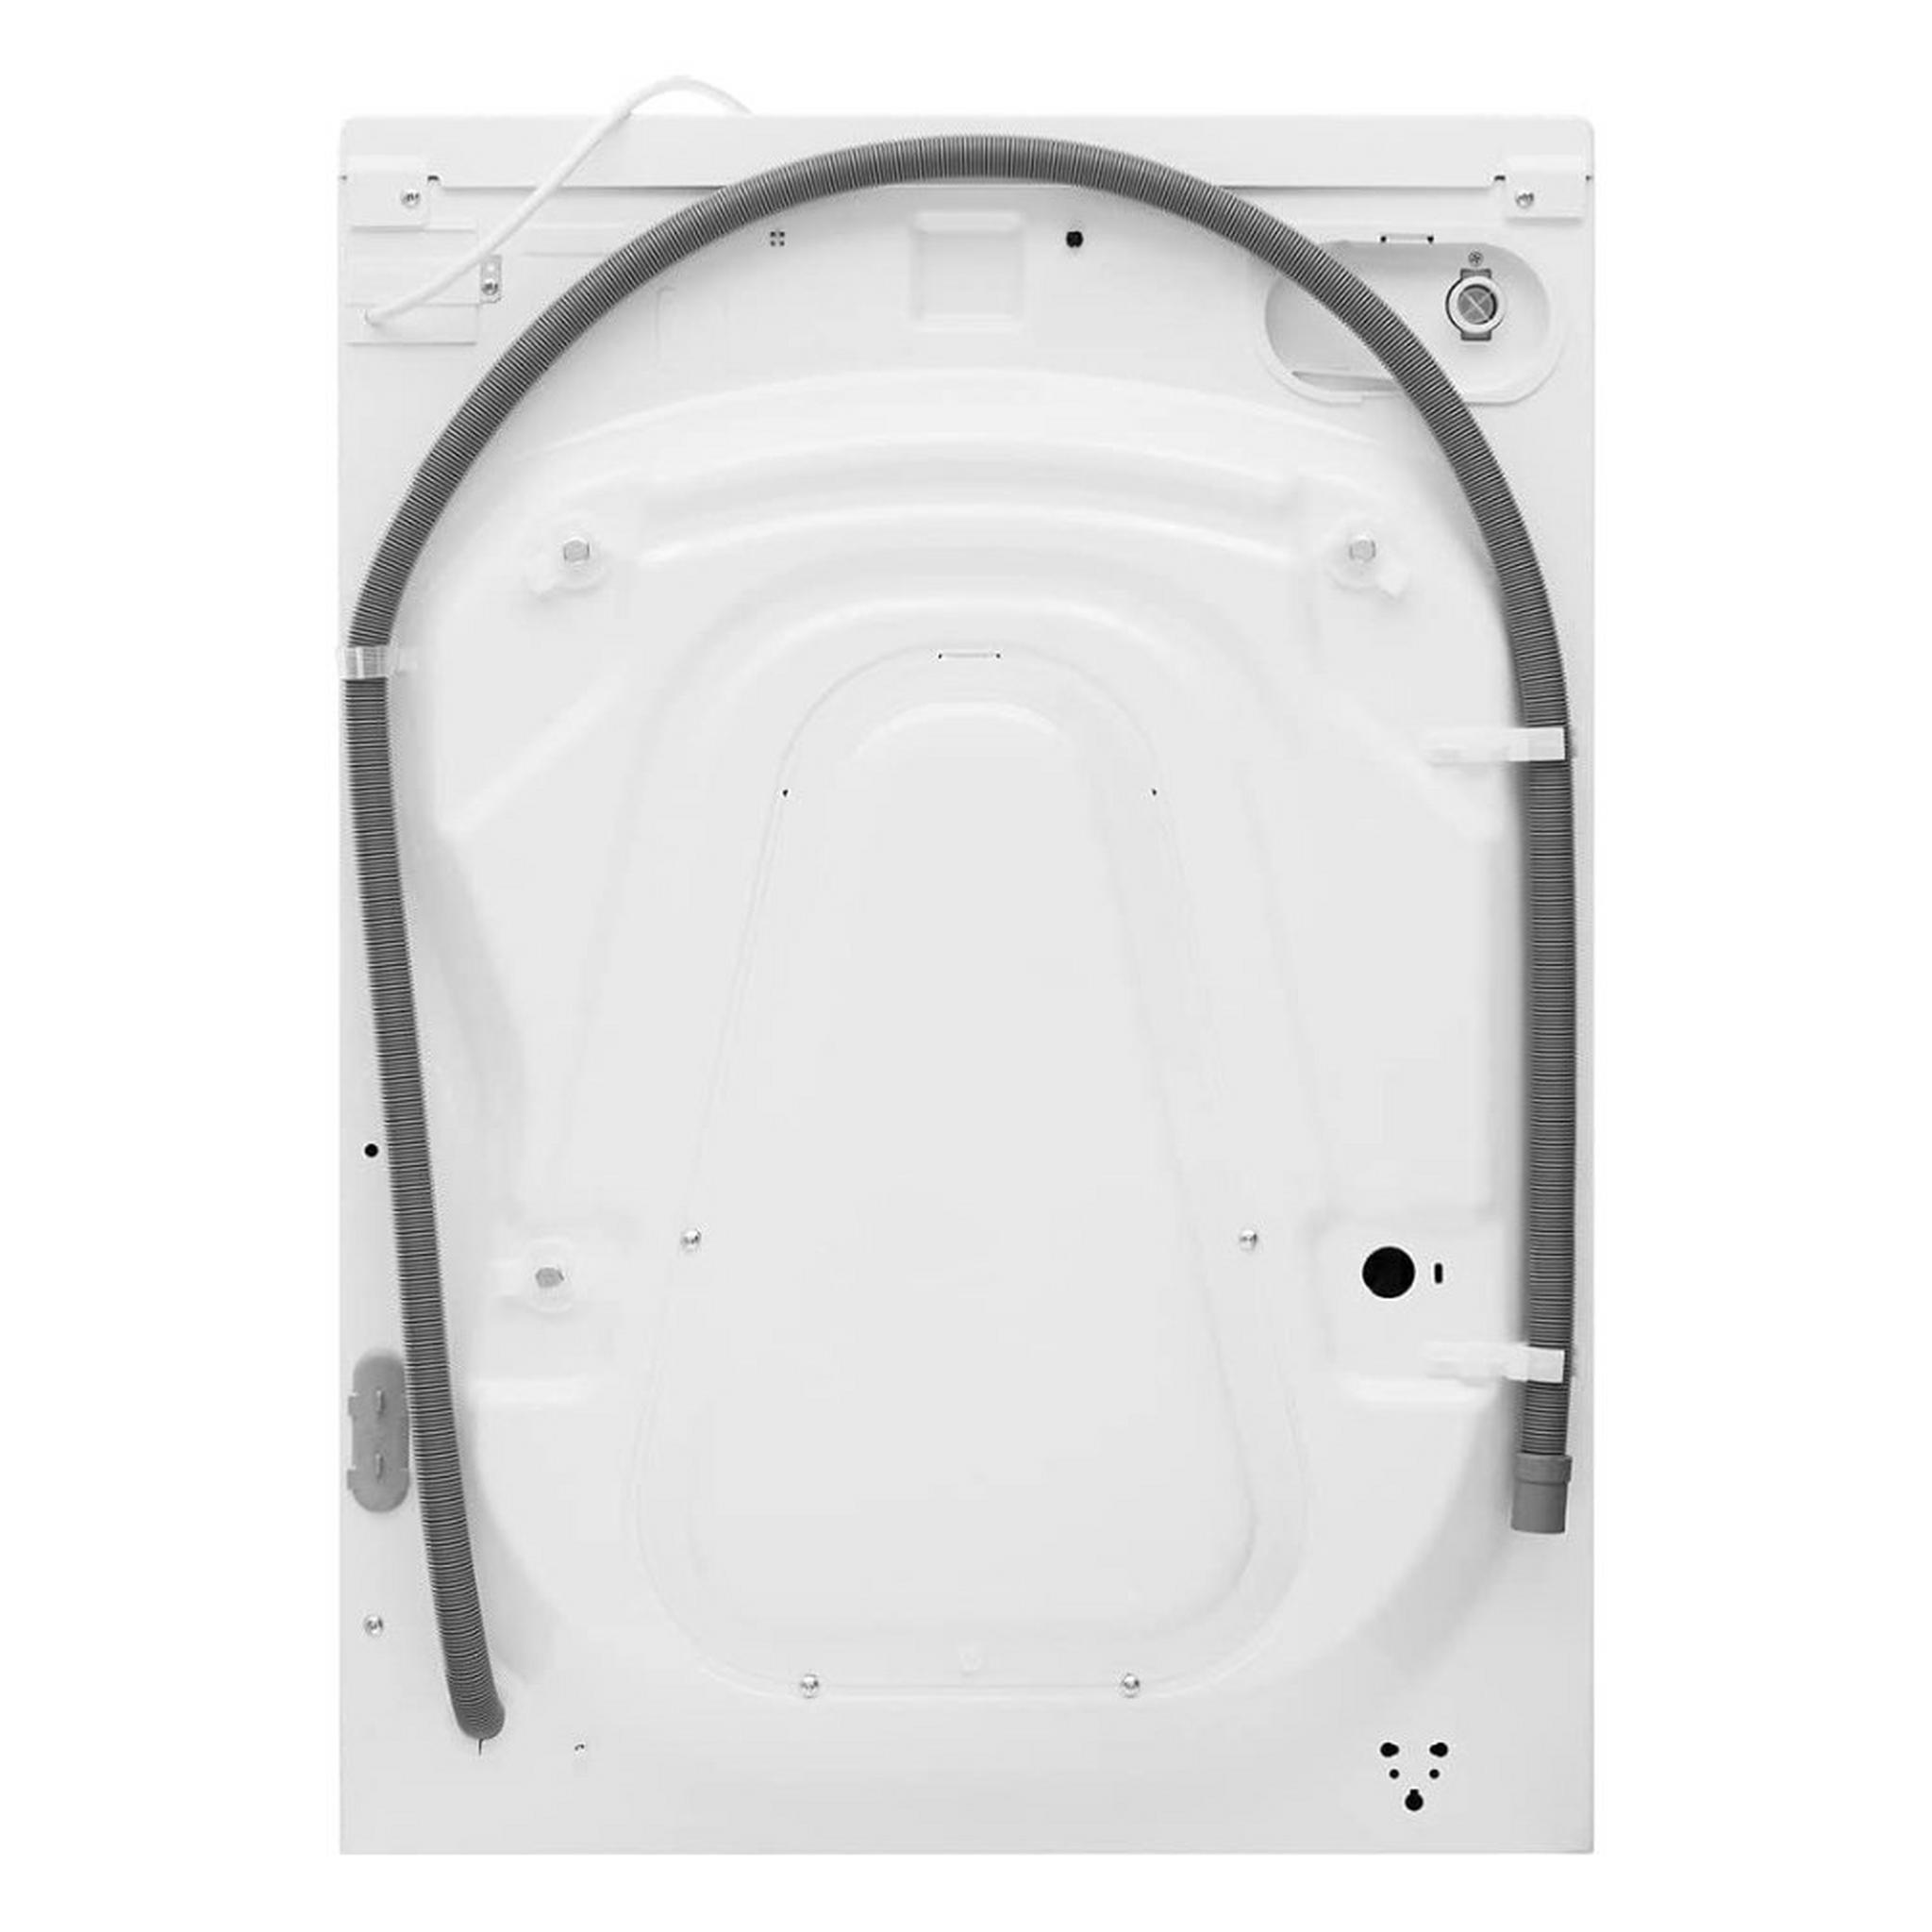 Whirlpool Front Load Washer 7Kg 1000rpm (FWF71052W GCC) White